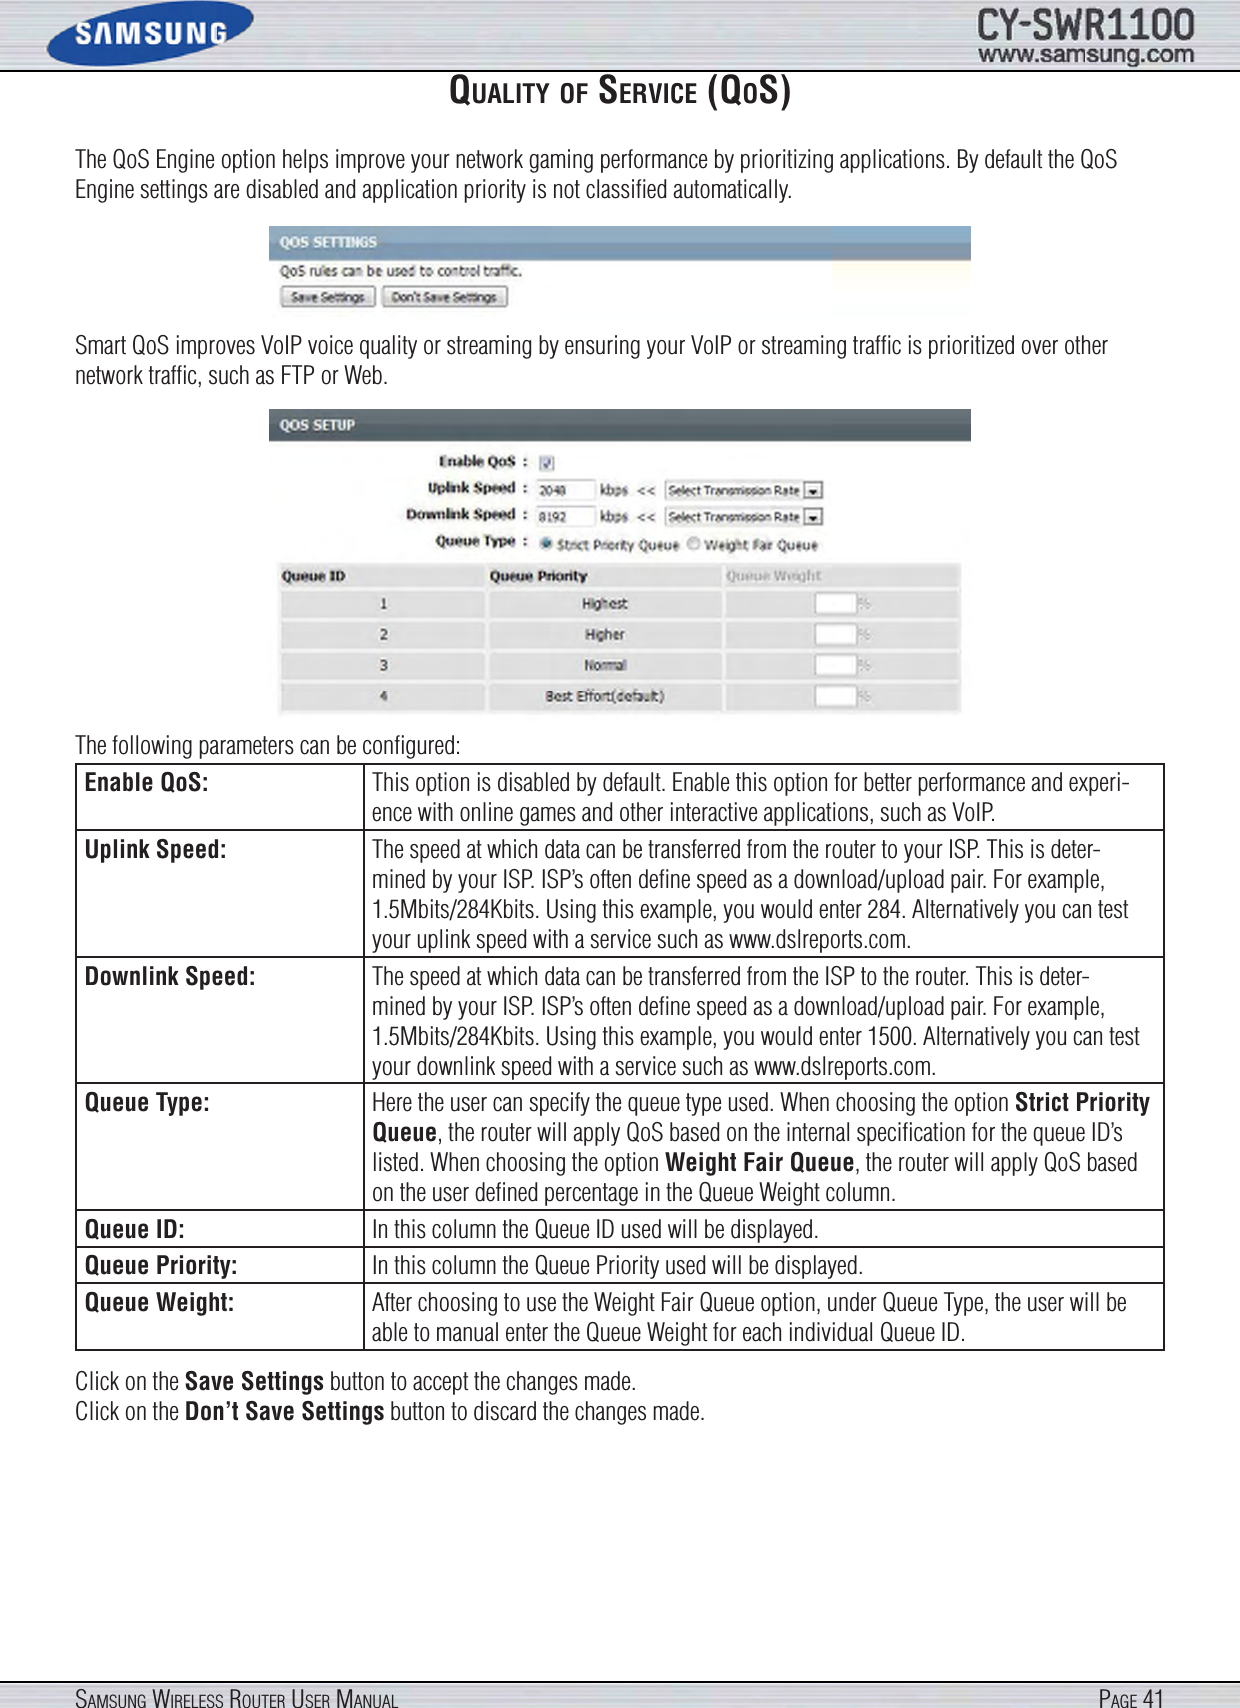 Page 41SamSung WireleSS router uSer manualqualIty of SerVIce (qoS)The QoS Engine option helps improve your network gaming performance by prioritizing applications. By default the QoS Engine settings are disabled and application priority is not classiﬁed automatically.Smart QoS improves VoIP voice quality or streaming by ensuring your VoIP or streaming trafﬁc is prioritized over other network trafﬁc, such as FTP or Web.The following parameters can be conﬁgured:Enable QoS: This option is disabled by default. Enable this option for better performance and experi-ence with online games and other interactive applications, such as VoIP.Uplink Speed: The speed at which data can be transferred from the router to your ISP. This is deter-mined by your ISP. ISP’s often deﬁne speed as a download/upload pair. For example, 1.5Mbits/284Kbits. Using this example, you would enter 284. Alternatively you can test your uplink speed with a service such as www.dslreports.com.Downlink Speed: The speed at which data can be transferred from the ISP to the router. This is deter-mined by your ISP. ISP’s often deﬁne speed as a download/upload pair. For example, 1.5Mbits/284Kbits. Using this example, you would enter 1500. Alternatively you can test your downlink speed with a service such as www.dslreports.com.Queue Type: Here the user can specify the queue type used. When choosing the option Strict Priority Queue, the router will apply QoS based on the internal speciﬁcation for the queue ID’s listed. When choosing the option Weight Fair Queue, the router will apply QoS based on the user deﬁned percentage in the Queue Weight column.Queue ID: In this column the Queue ID used will be displayed.Queue Priority: In this column the Queue Priority used will be displayed.Queue Weight: After choosing to use the Weight Fair Queue option, under Queue Type, the user will be able to manual enter the Queue Weight for each individual Queue ID.Click on the Save Settings button to accept the changes made.Click on the Don’t Save Settings button to discard the changes made.